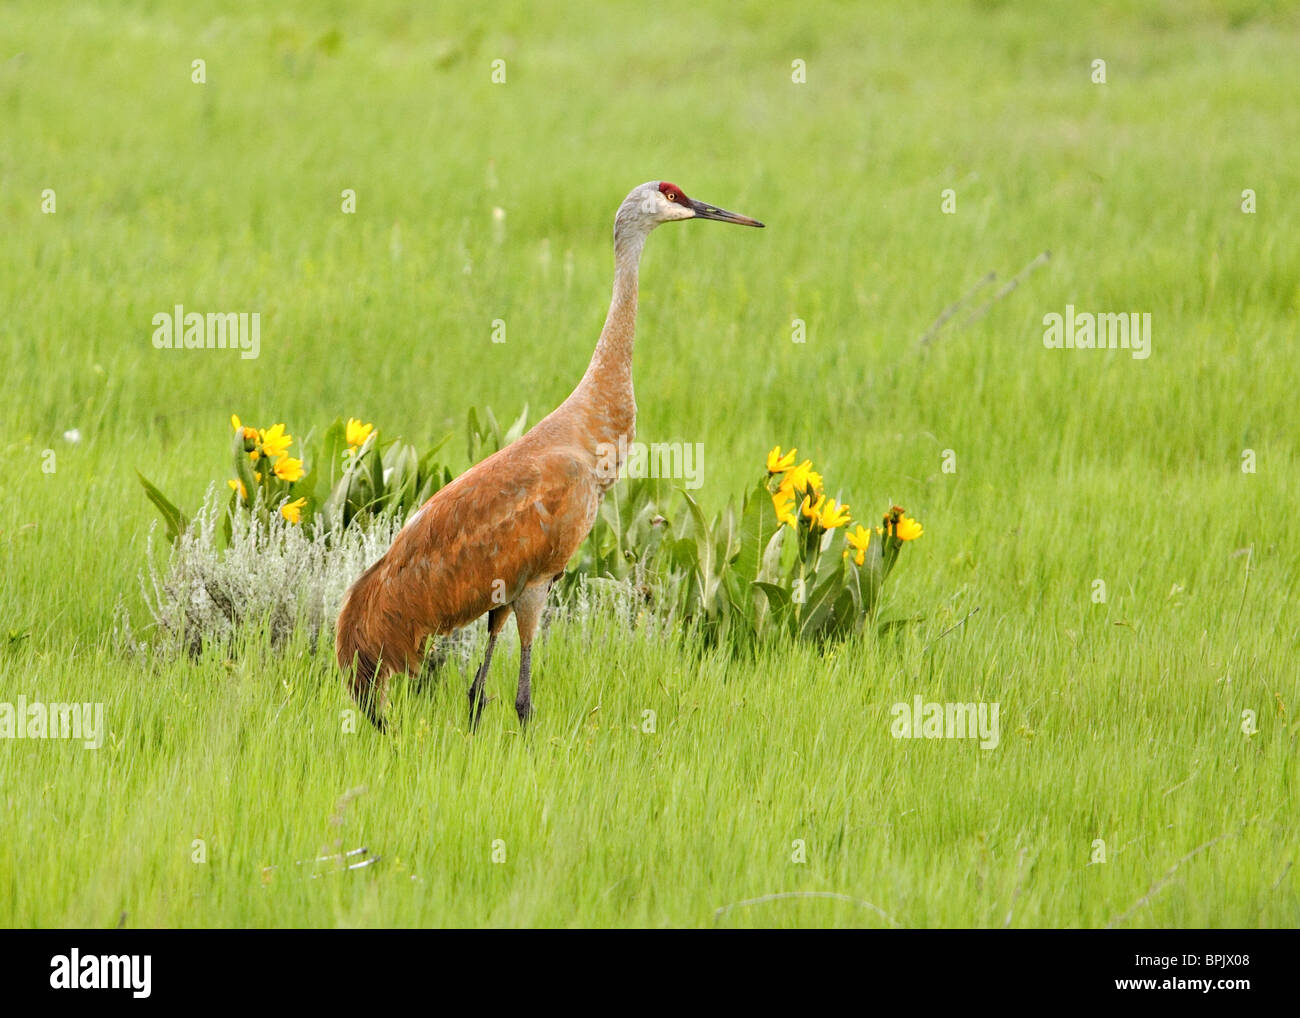 large sandhill crane walking in green field with wildflowers Stock Photo